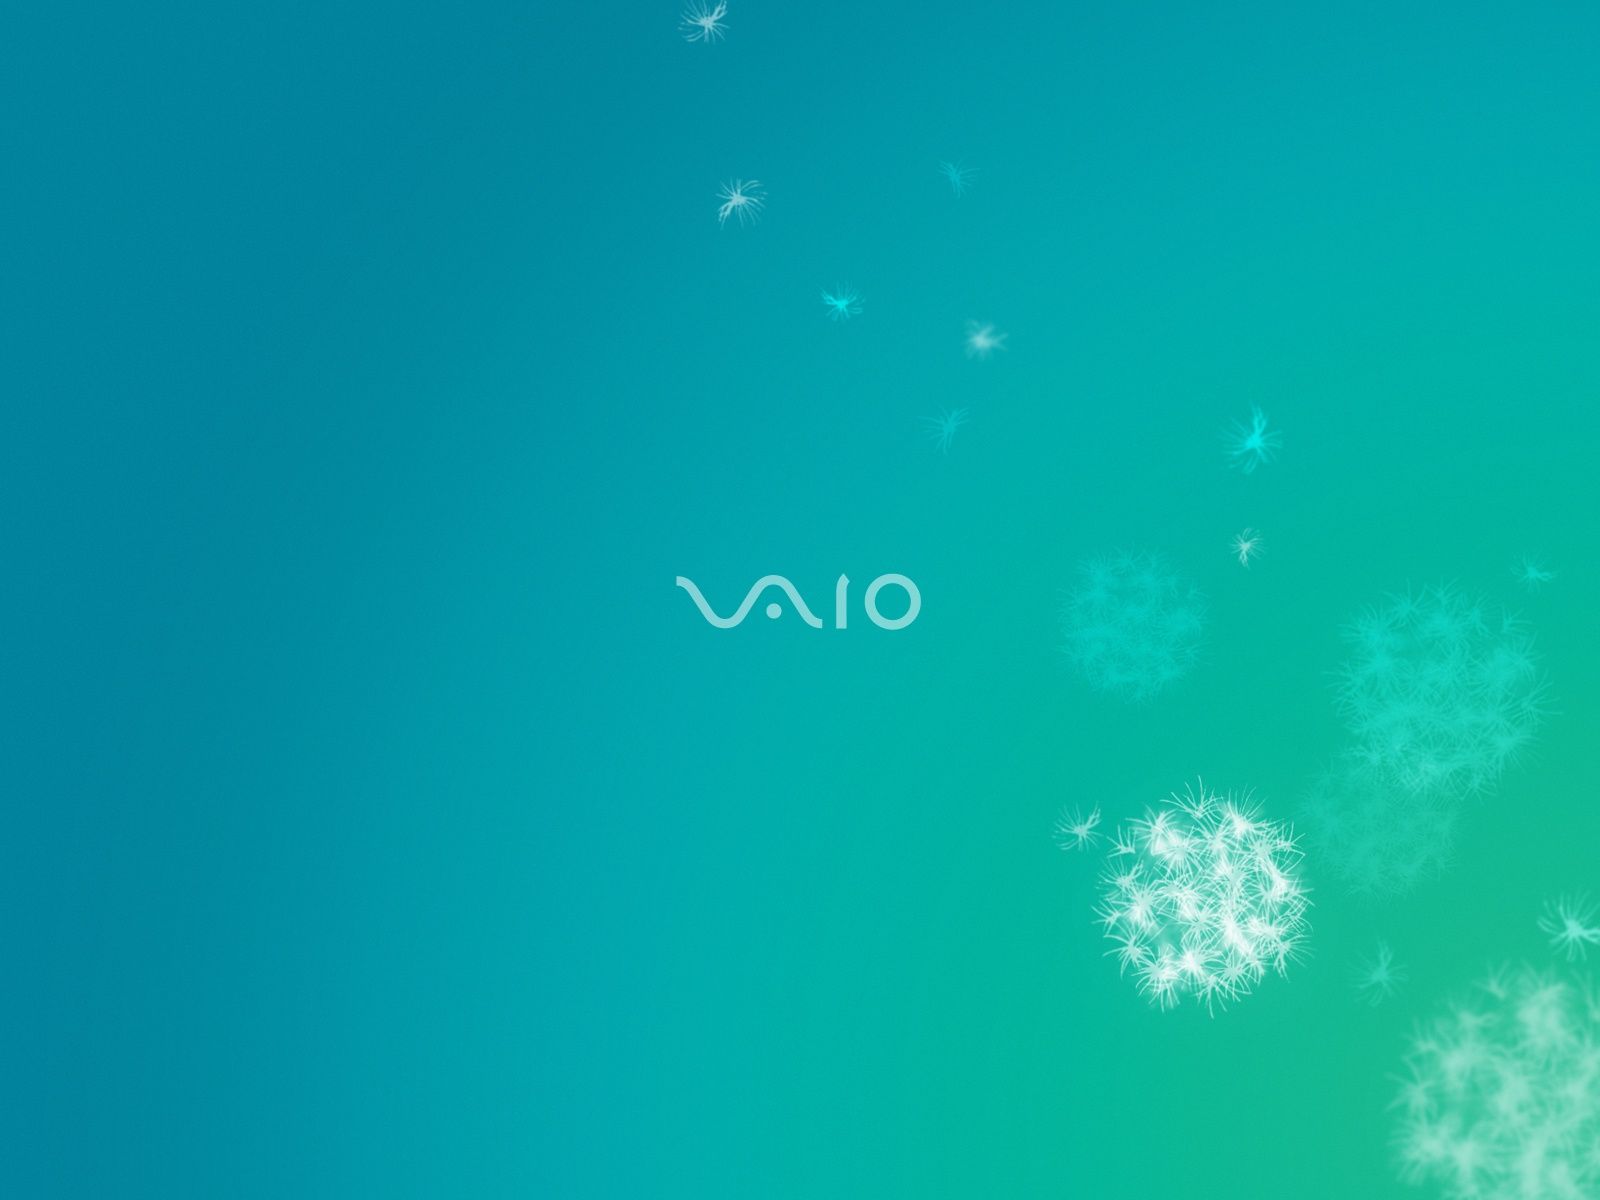 Sony VAIO Wallpapers - - HD Backgrounds